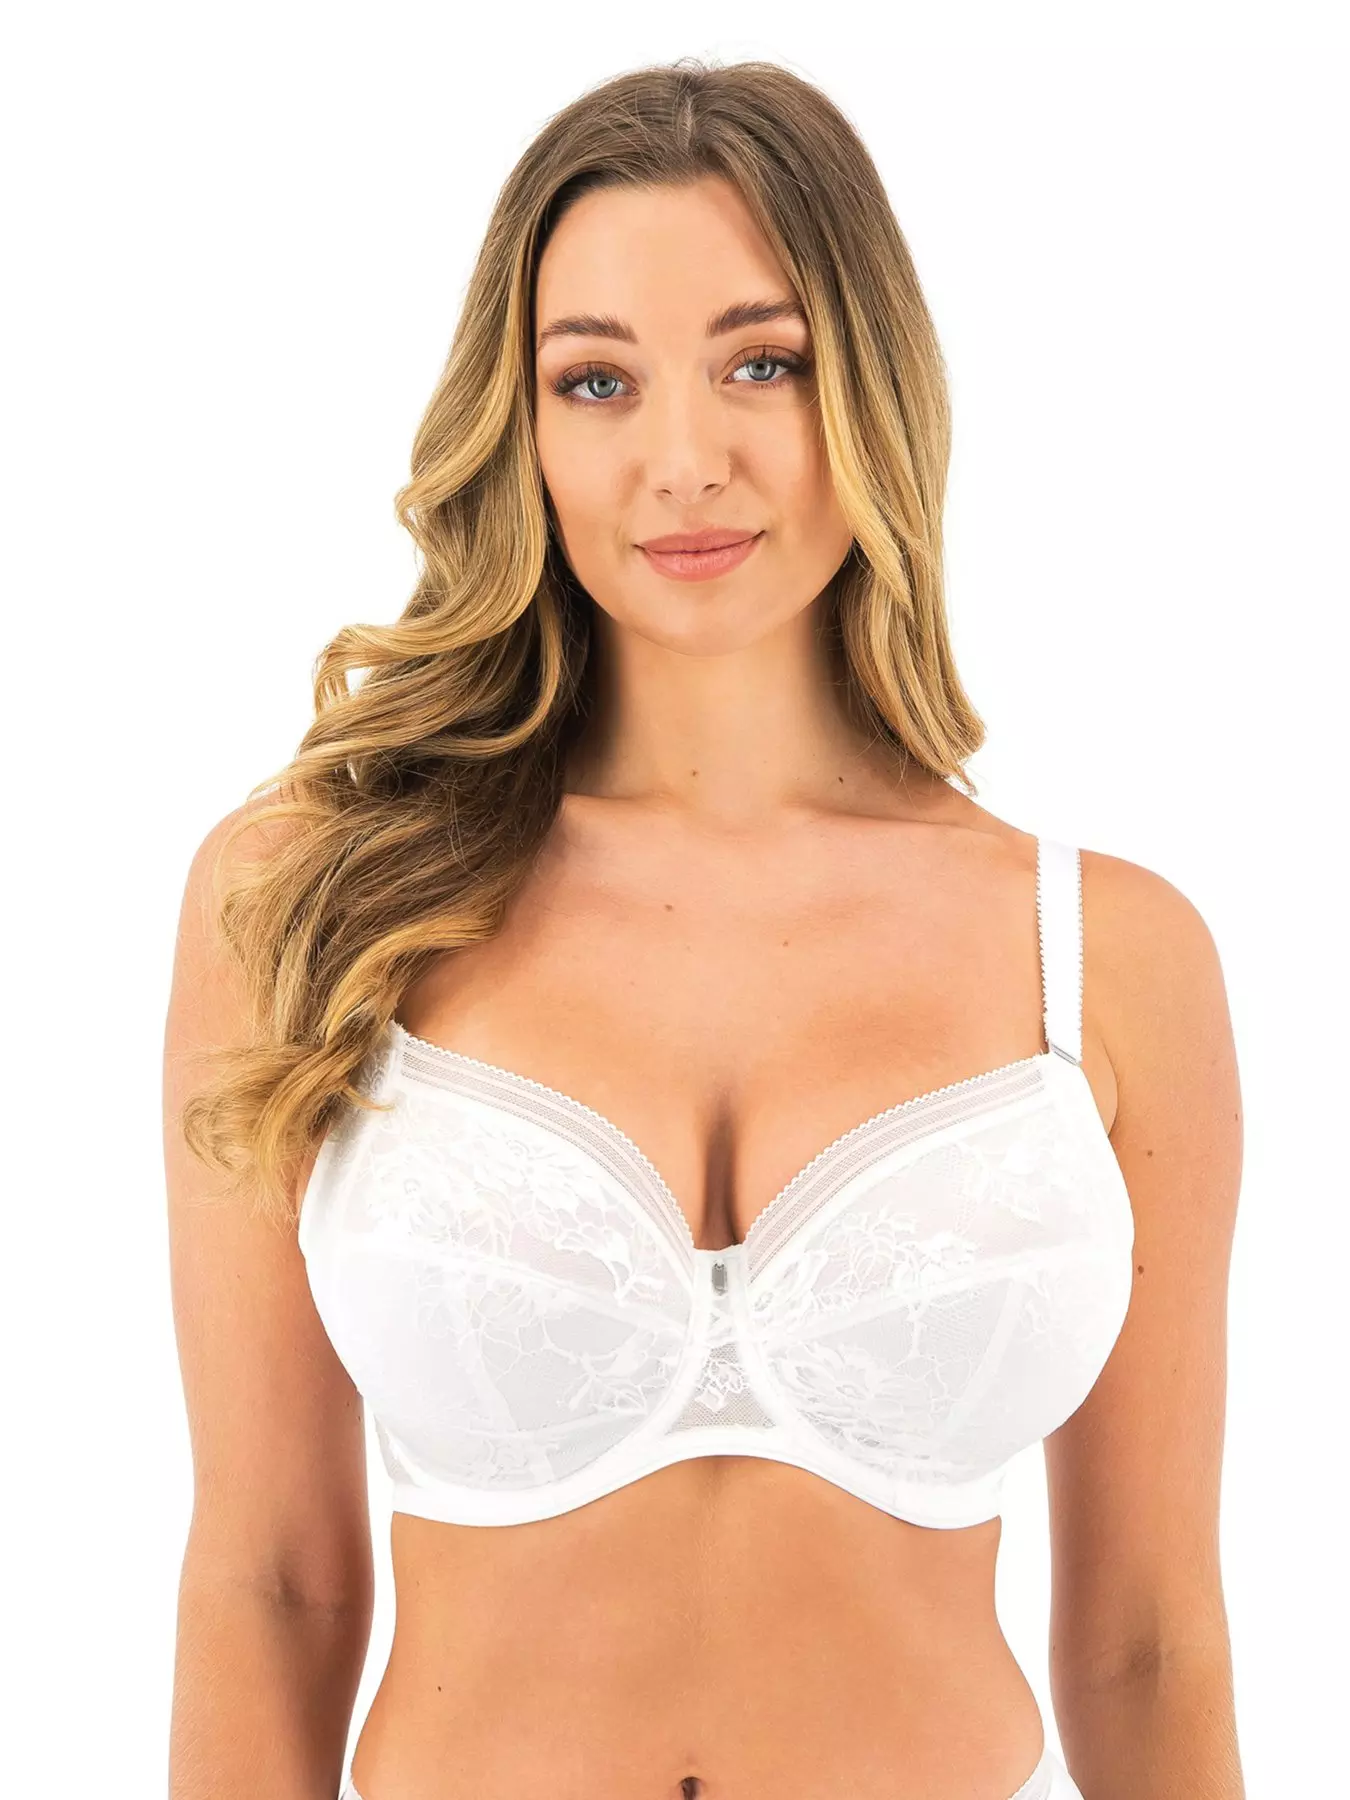 Clothing & Shoes - Socks & Underwear - Bras - 2 Pack Invisible Edge Body  Bra With Scallop Neckline - Online Shopping for Canadians